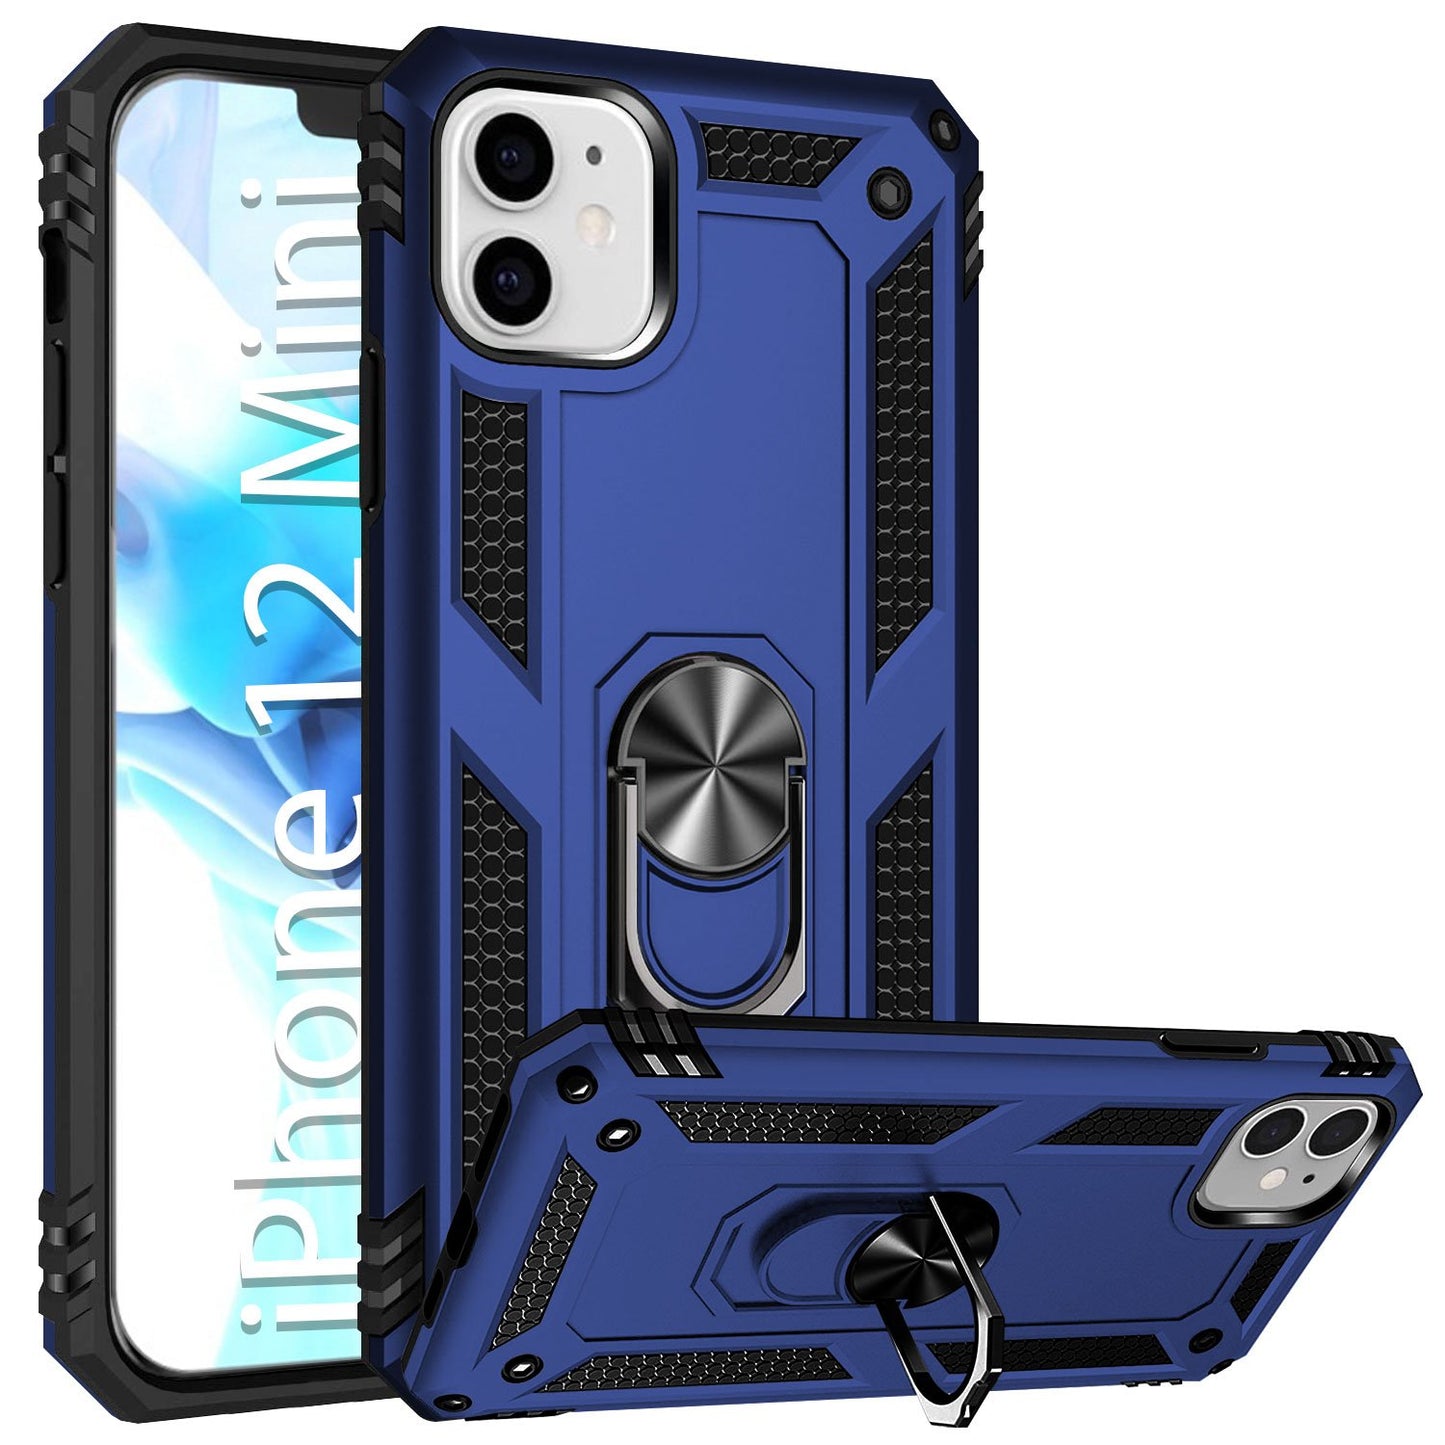 CCIPH12IFBL - iPhone 12 Mini Combo Case, Shockproof Case with Built in Ring, Kickstand and Magnet for Car Mounts Compatible to Apple iPhone 12 Mini